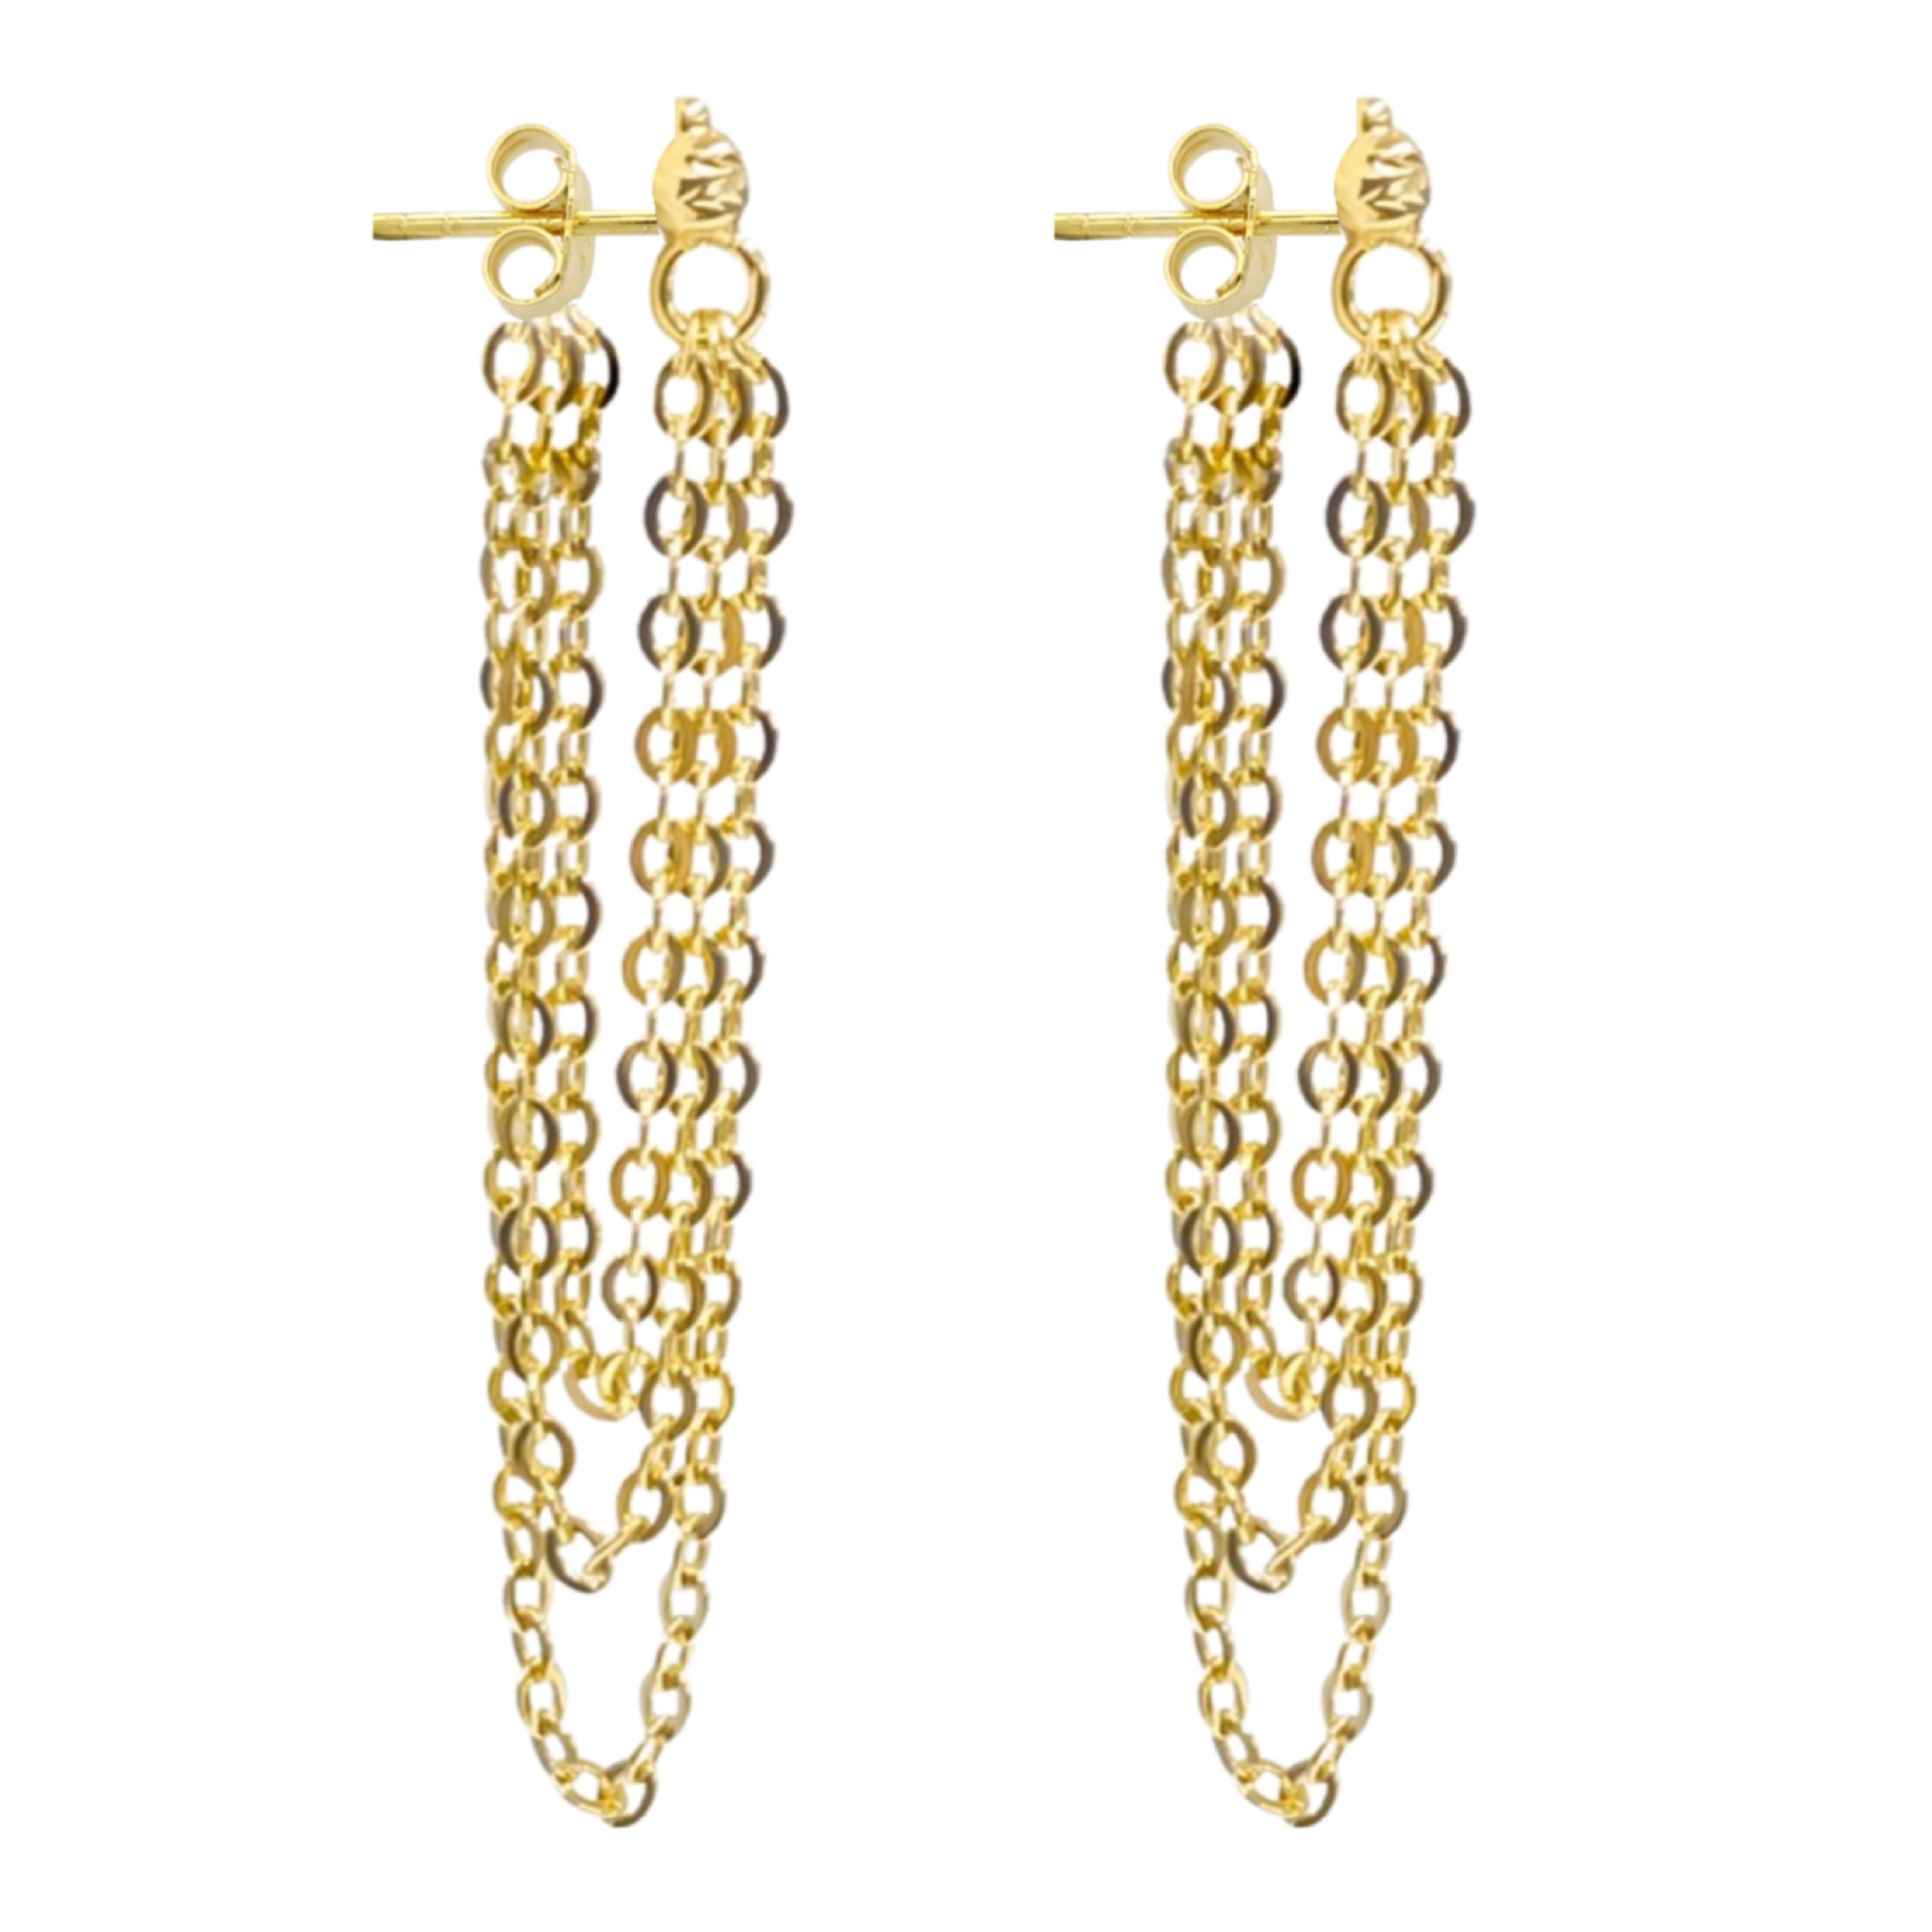 Single Layer Gold Plated Gold-Tone Kan Chain Accessory For Women / Girls  Ear Thread at Rs 99/piece | Gold Plated Earring in Ahmedabad | ID:  2853188170448